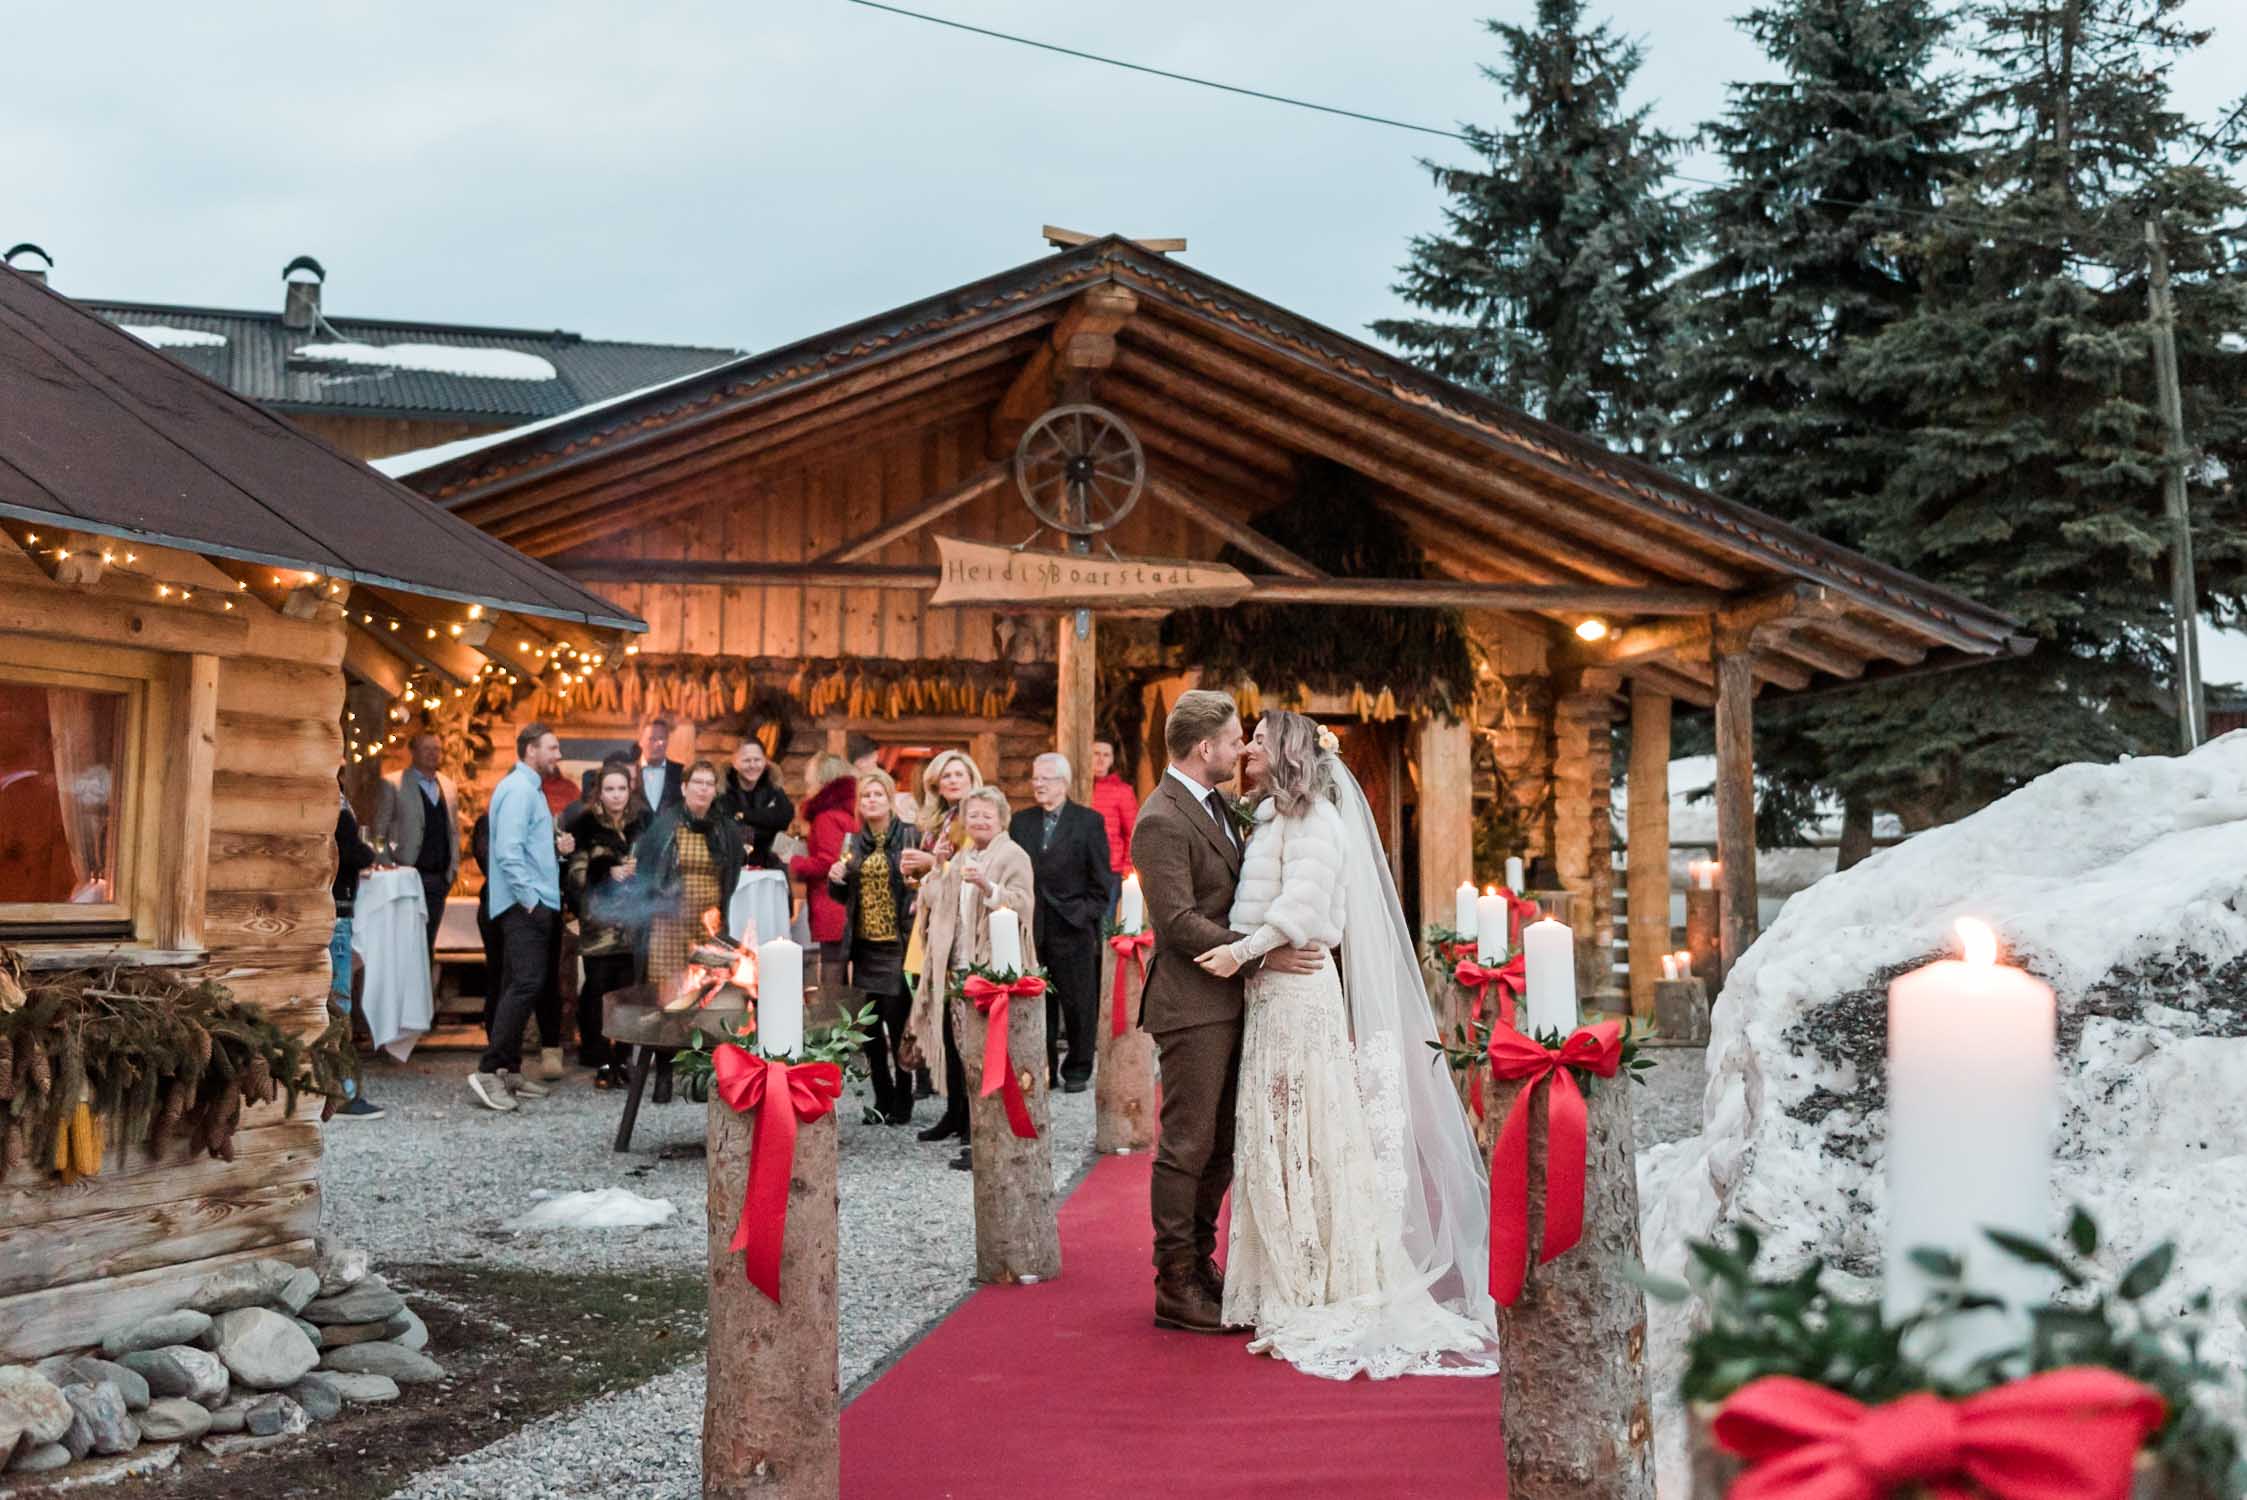 A bride and groom at their destination winter wedding in Westendorf, Tyrol, Austria. Captured by a destination wedding photographer for intimate weddings and elopements in Europe